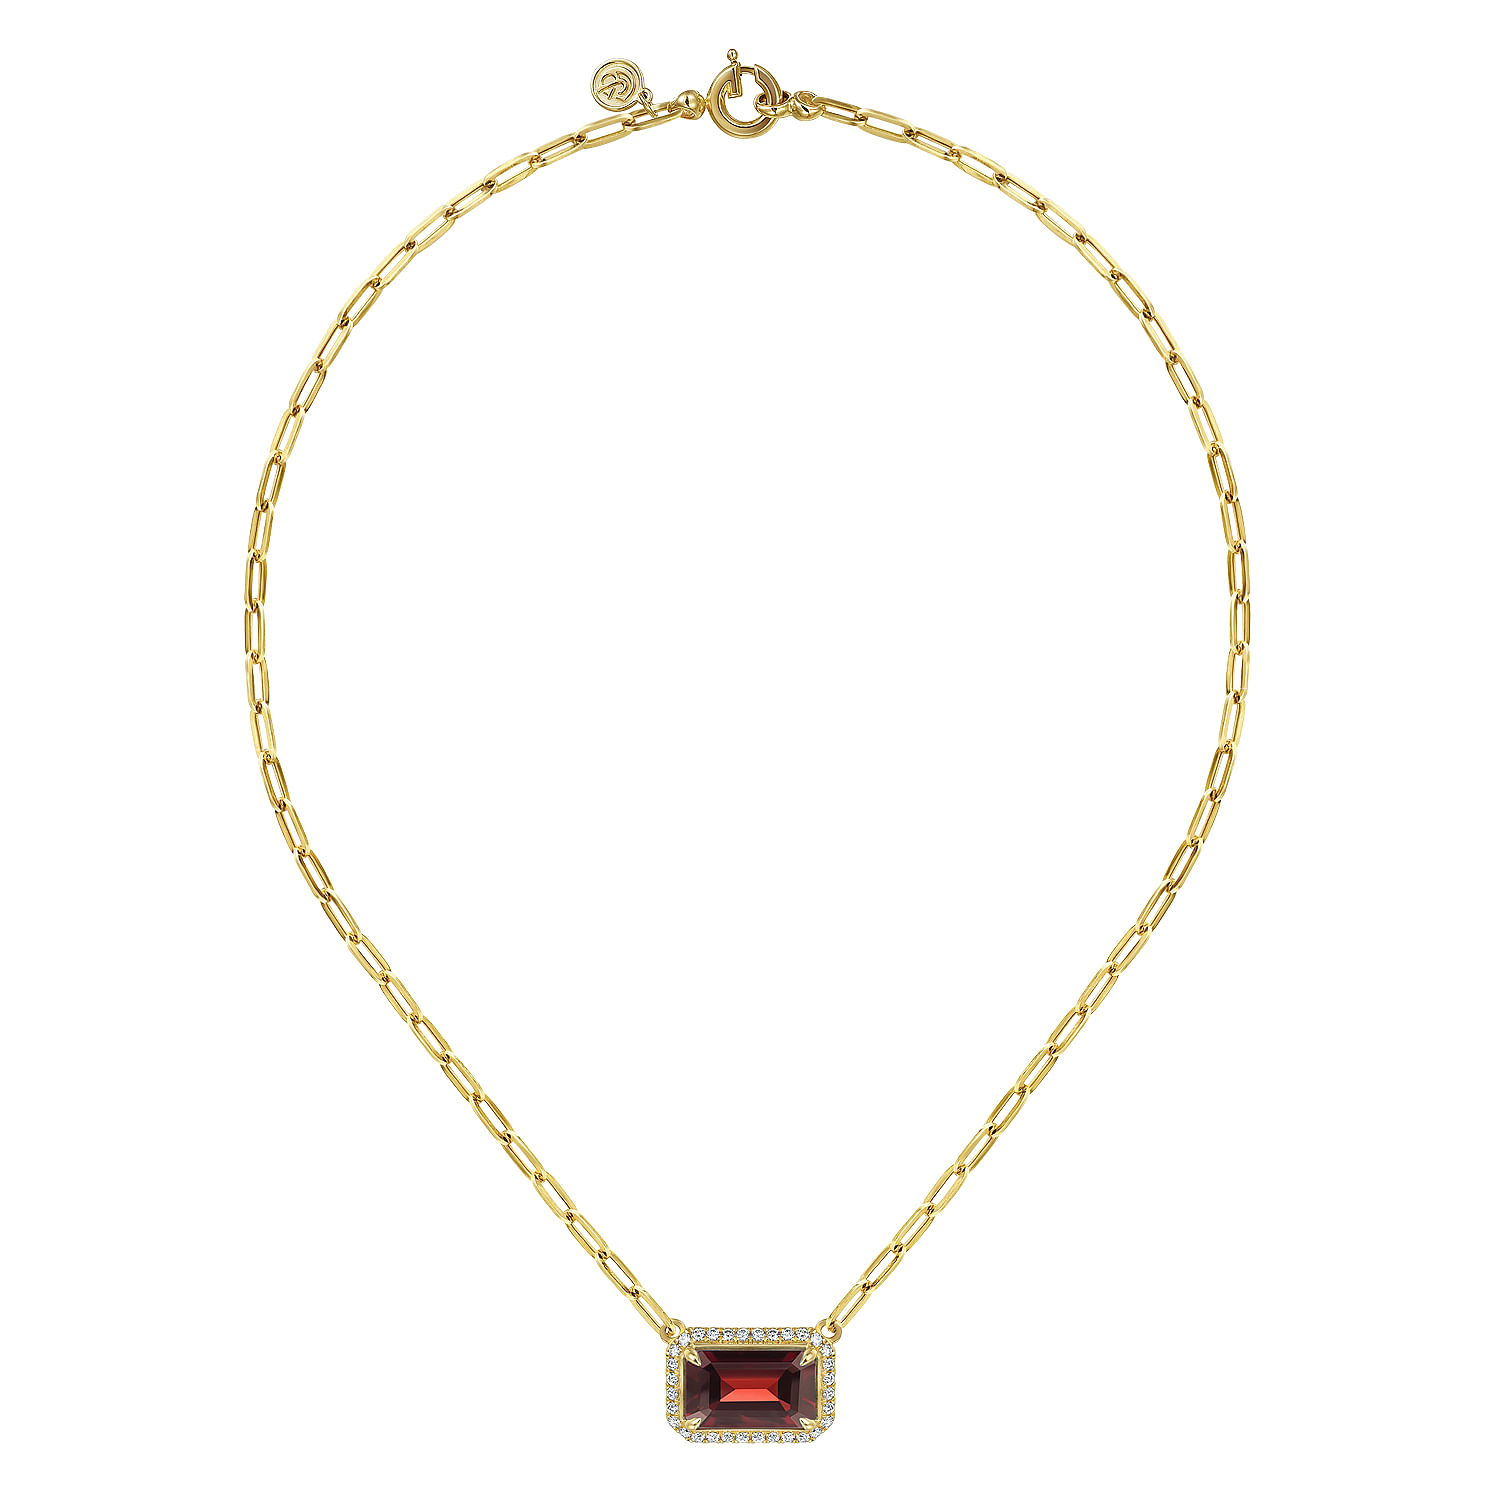 14K Yellow Gold Diamond and Garnet Emerald Cut Necklace With Flower Pattern Gallery